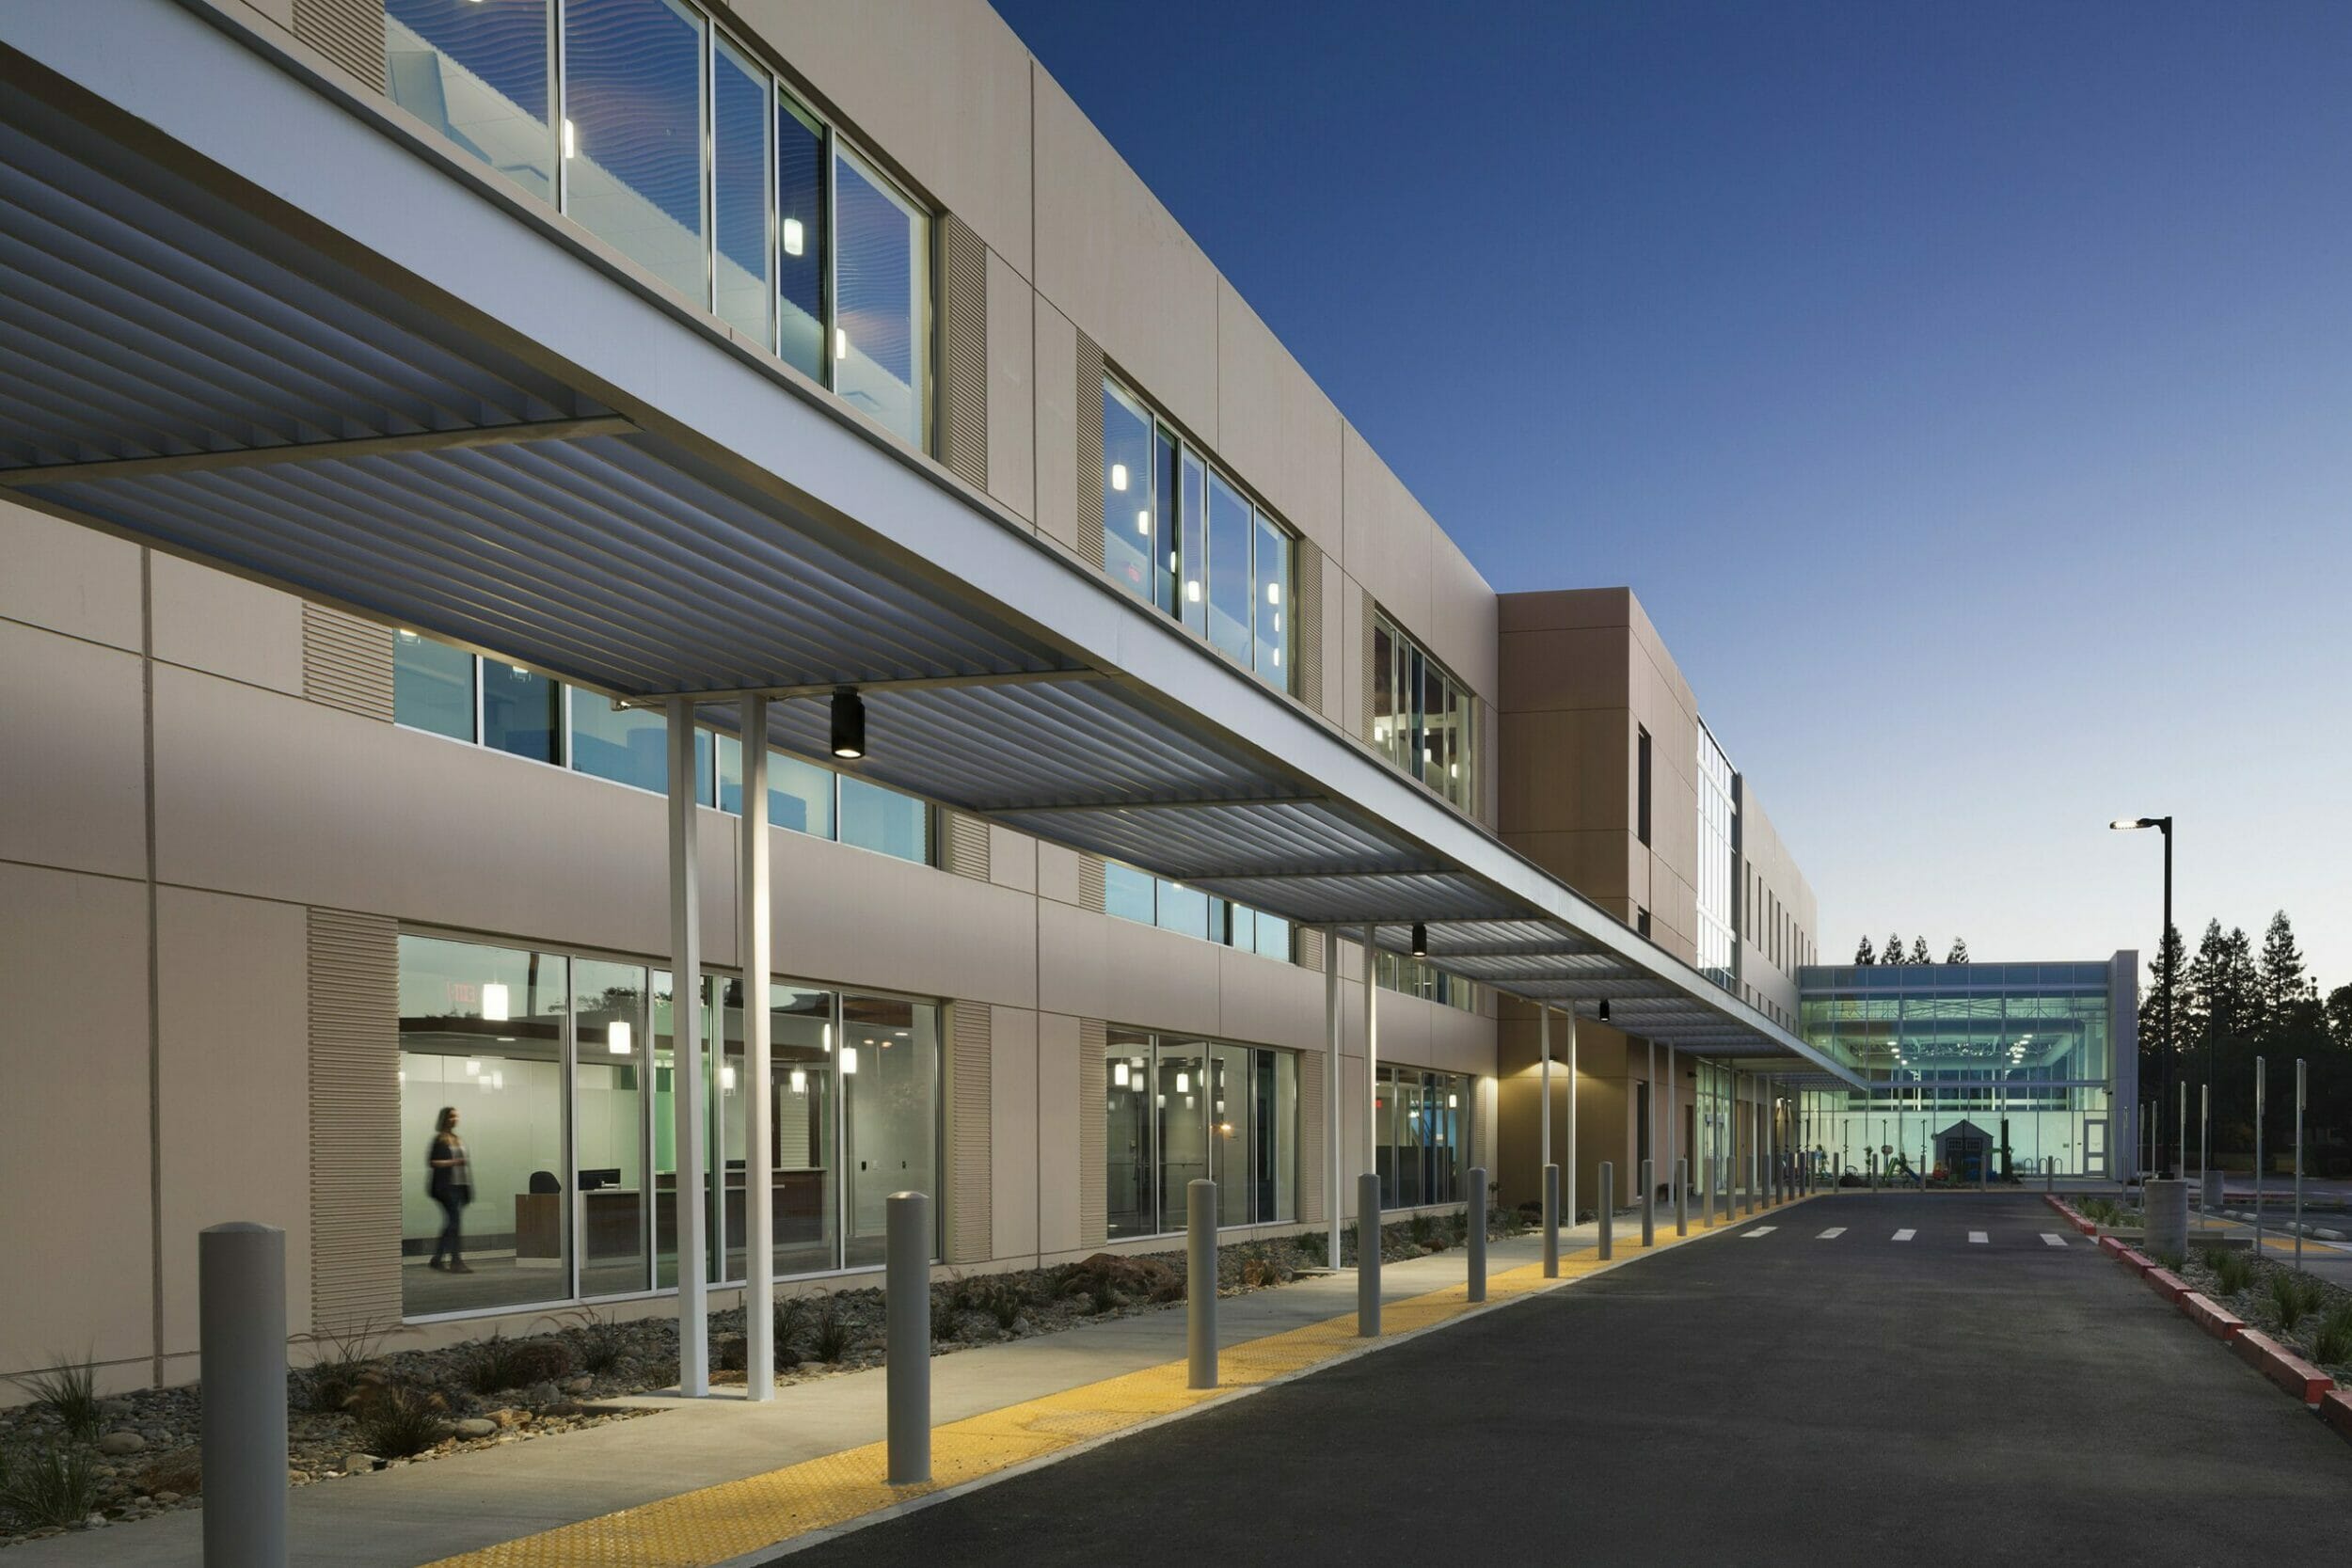 Close-up of exterior of medical building with gray metal awning over walkway to all glass section of building